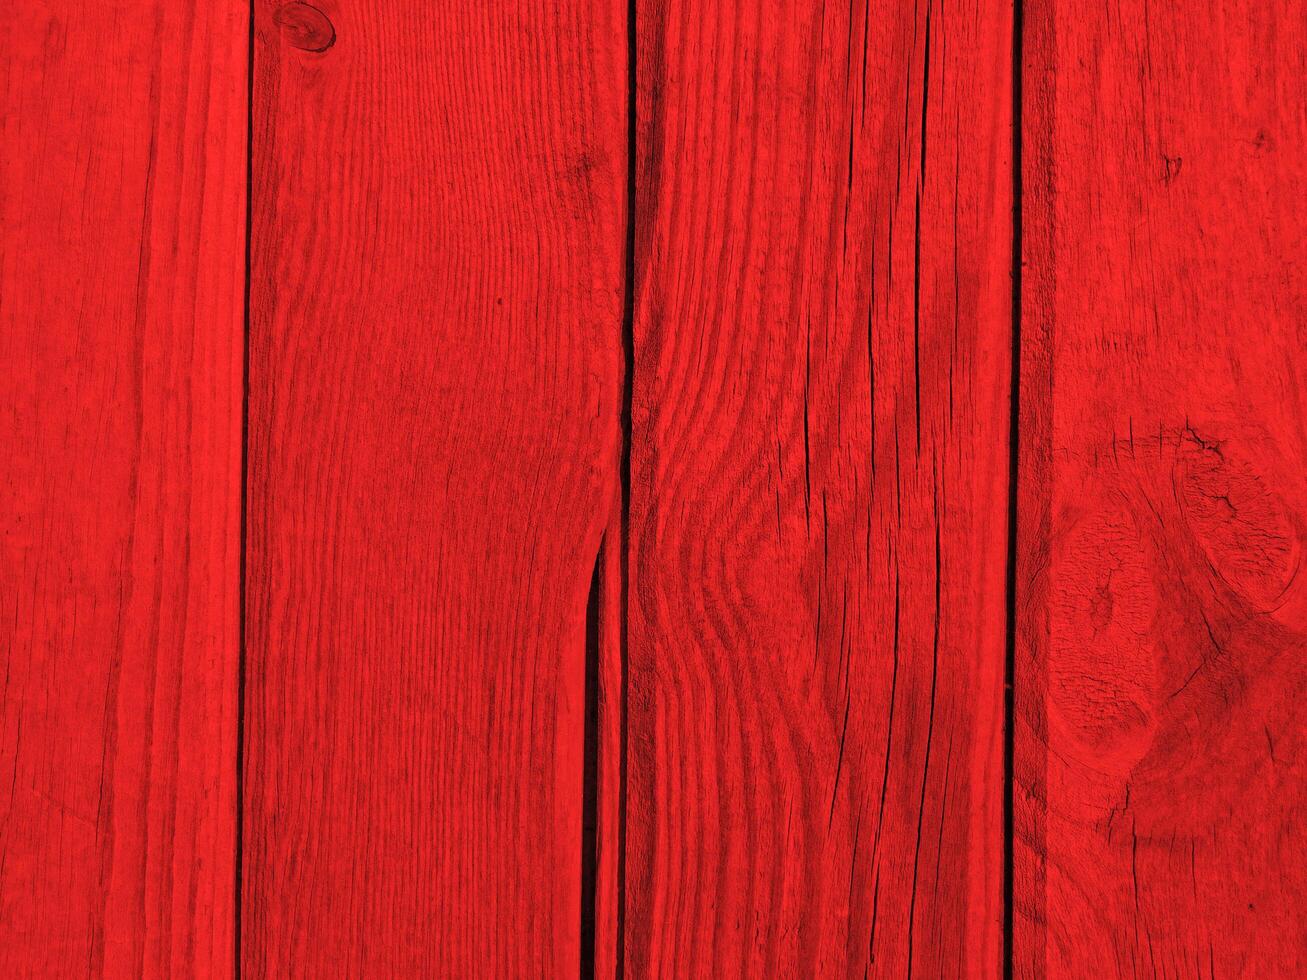 Red Wood Texture photo